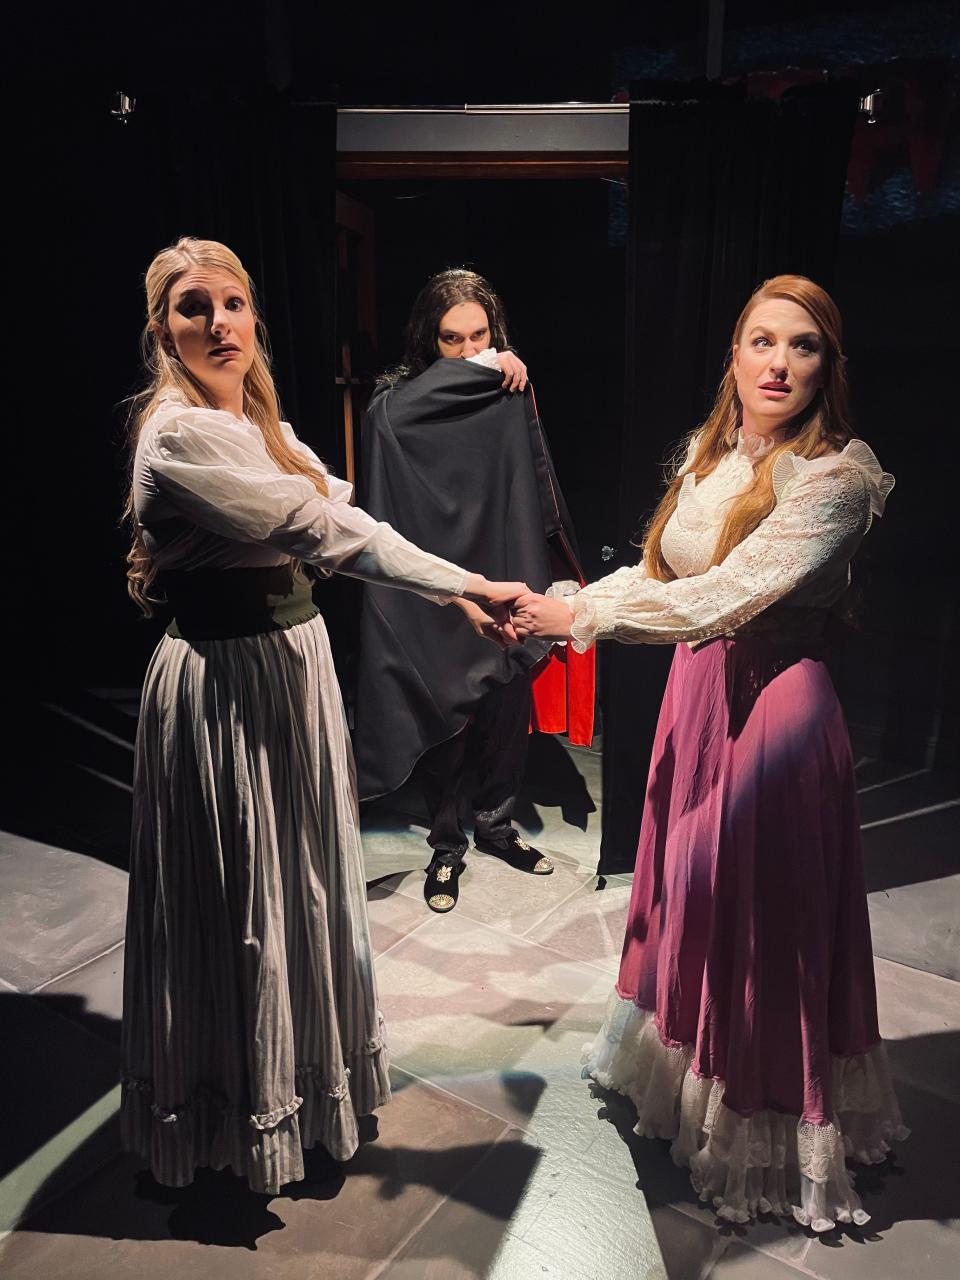 Sarah Lawrence as "Lucy," Daniel San Roman as "Dracula" and Jenny Augeri as "Mina" in the play "Dracula," on stage at Melbourne Civic Theatre through Nov. 12, 2023. Visit mymct.org.